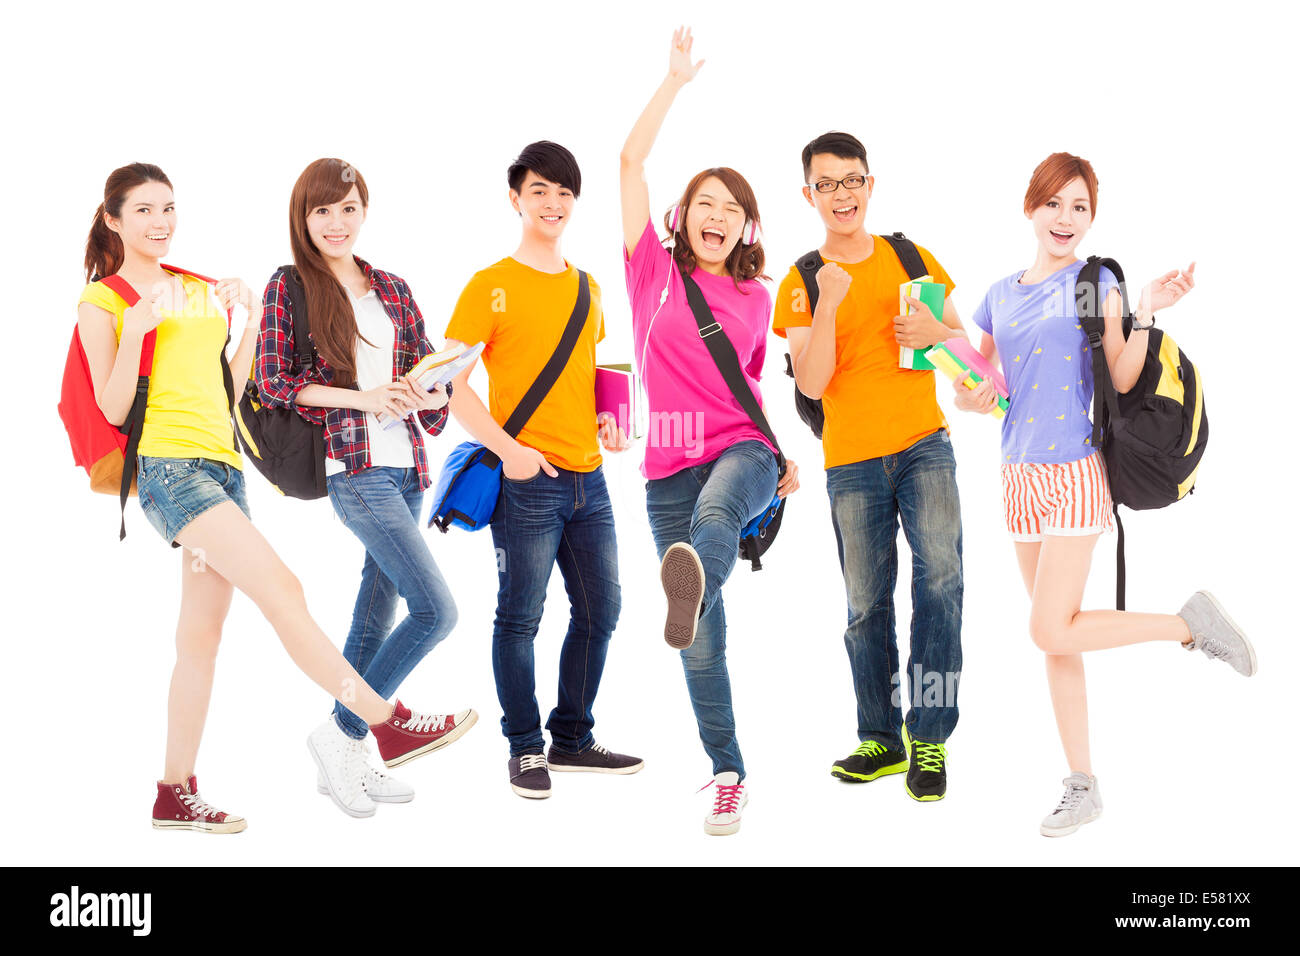 happy young students standing together Stock Photo